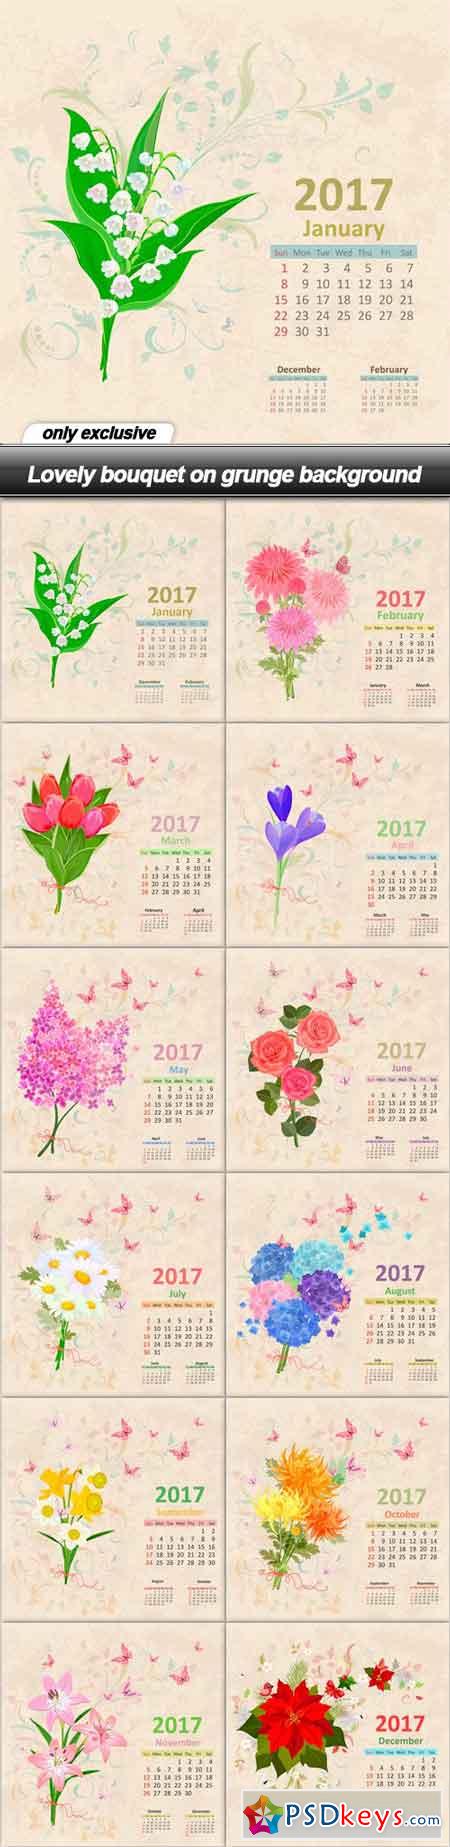 Lovely bouquet on grunge background - 12 EPS